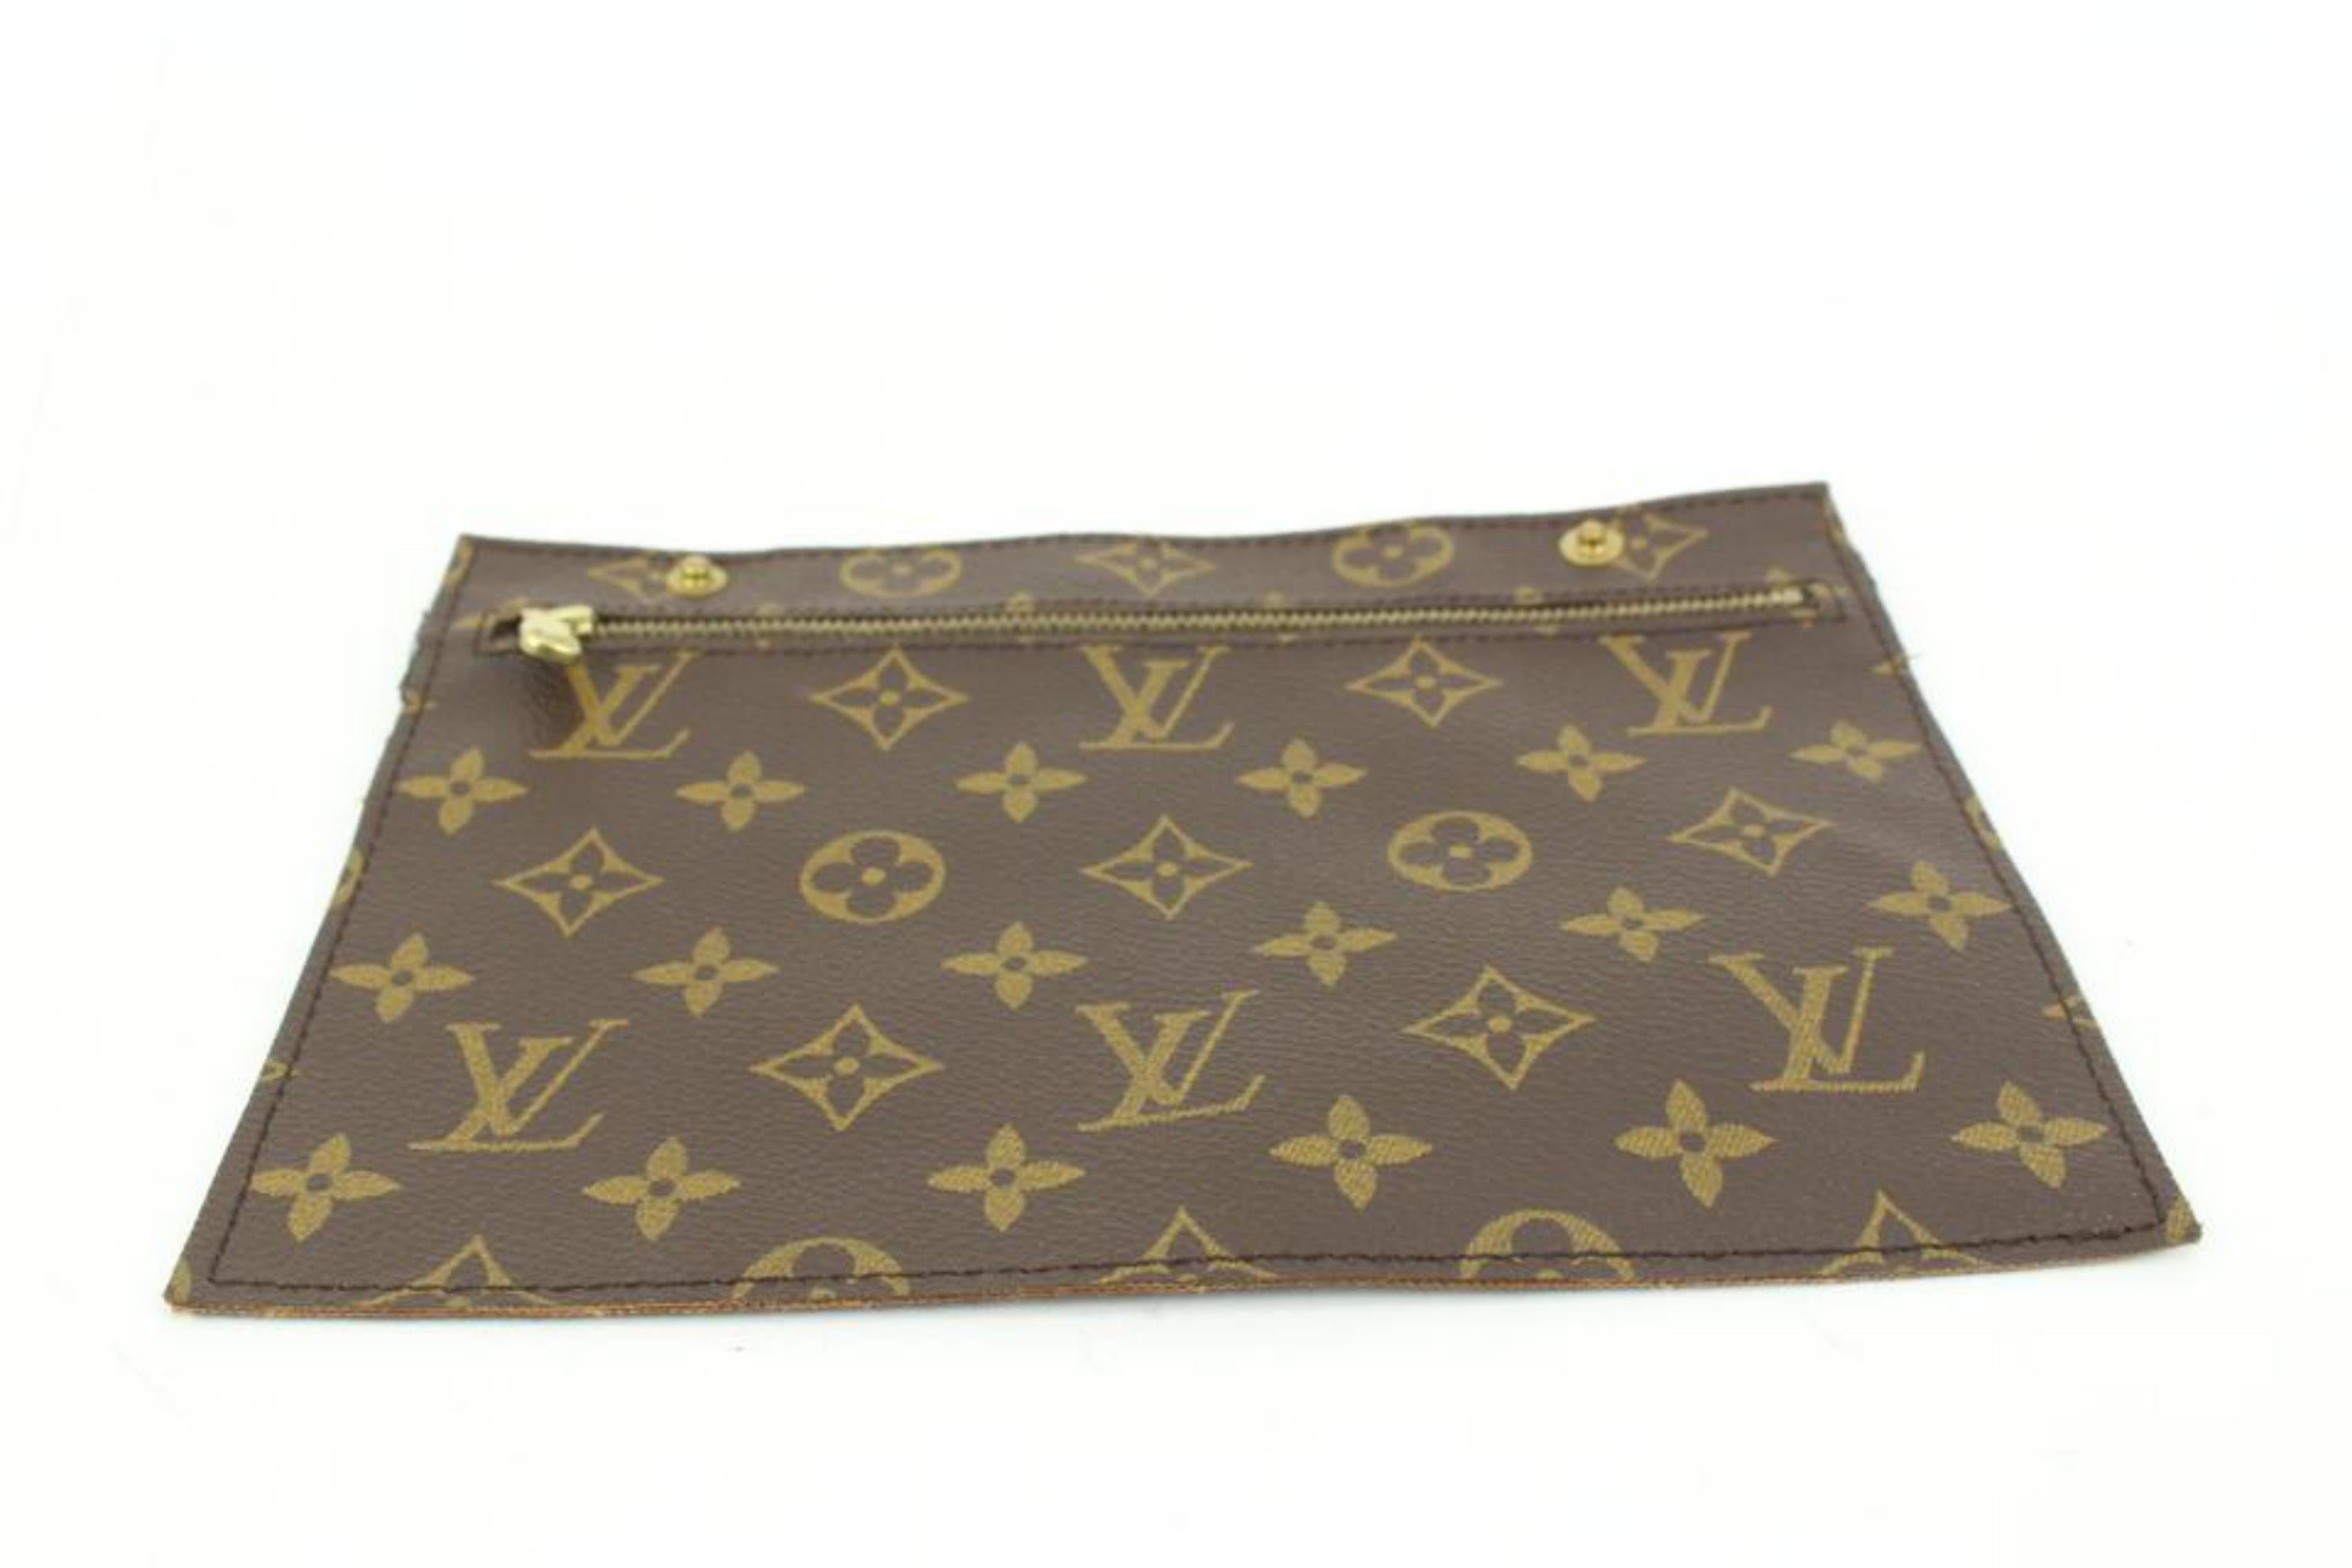 Louis Vuitton Monogram Randonnee Wristlet Pouch Insert Clutch 46LV35 In Good Condition For Sale In Dix hills, NY